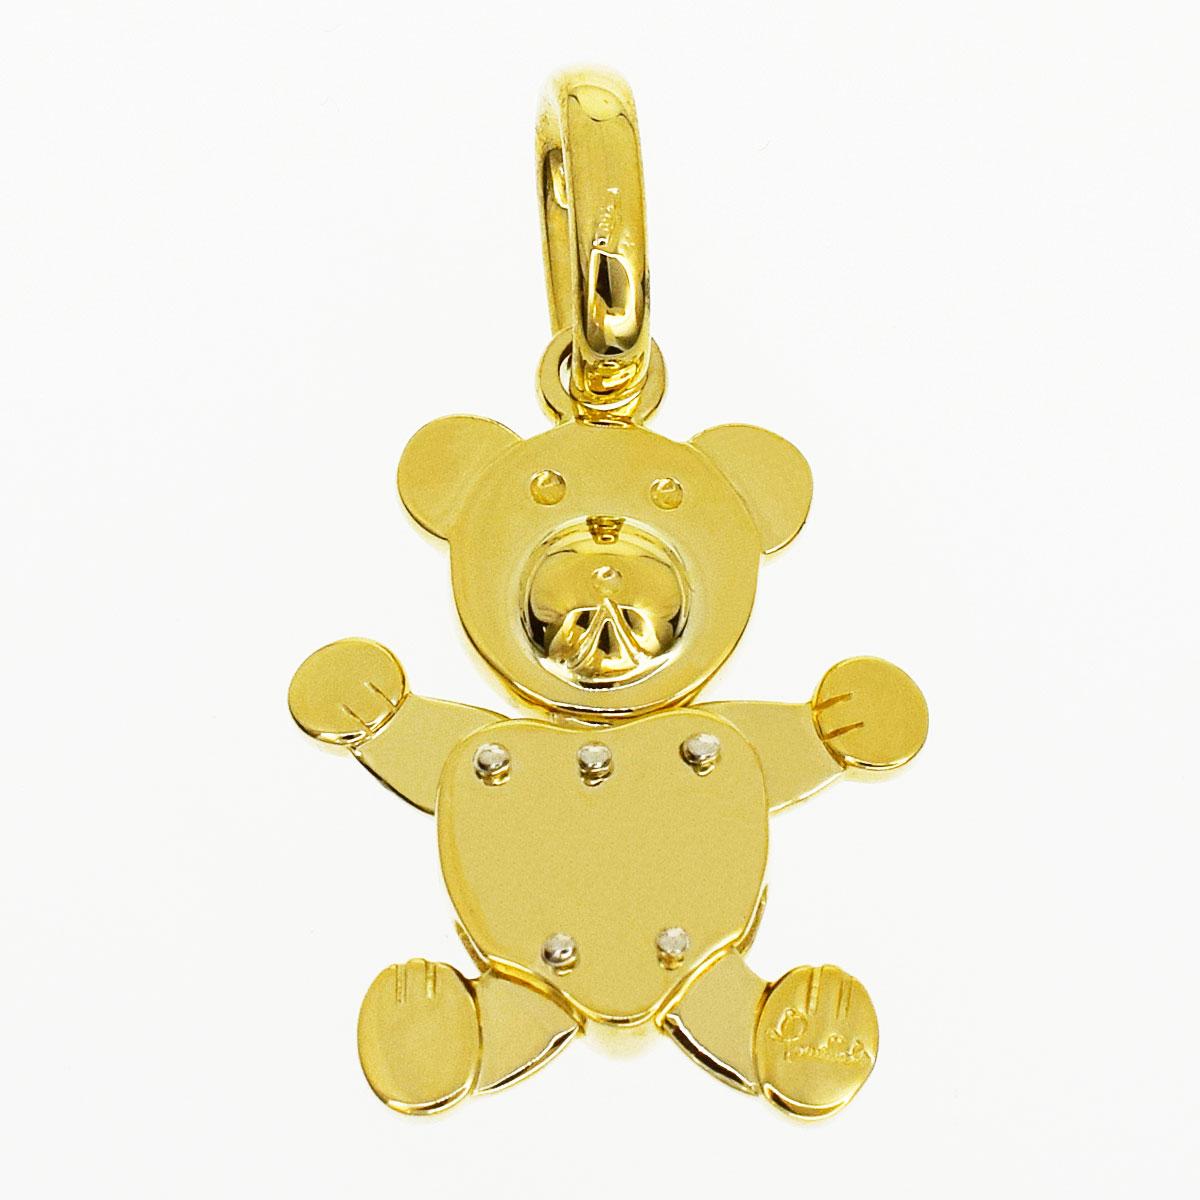 Brand:Pomellato
Name:Orsetto Bear pendant top
Material:750 K18 YG Yellow Gold
Weight:7.5g（Approx）
Size:(Included Vatican) H33mm×W19mm / H1.29